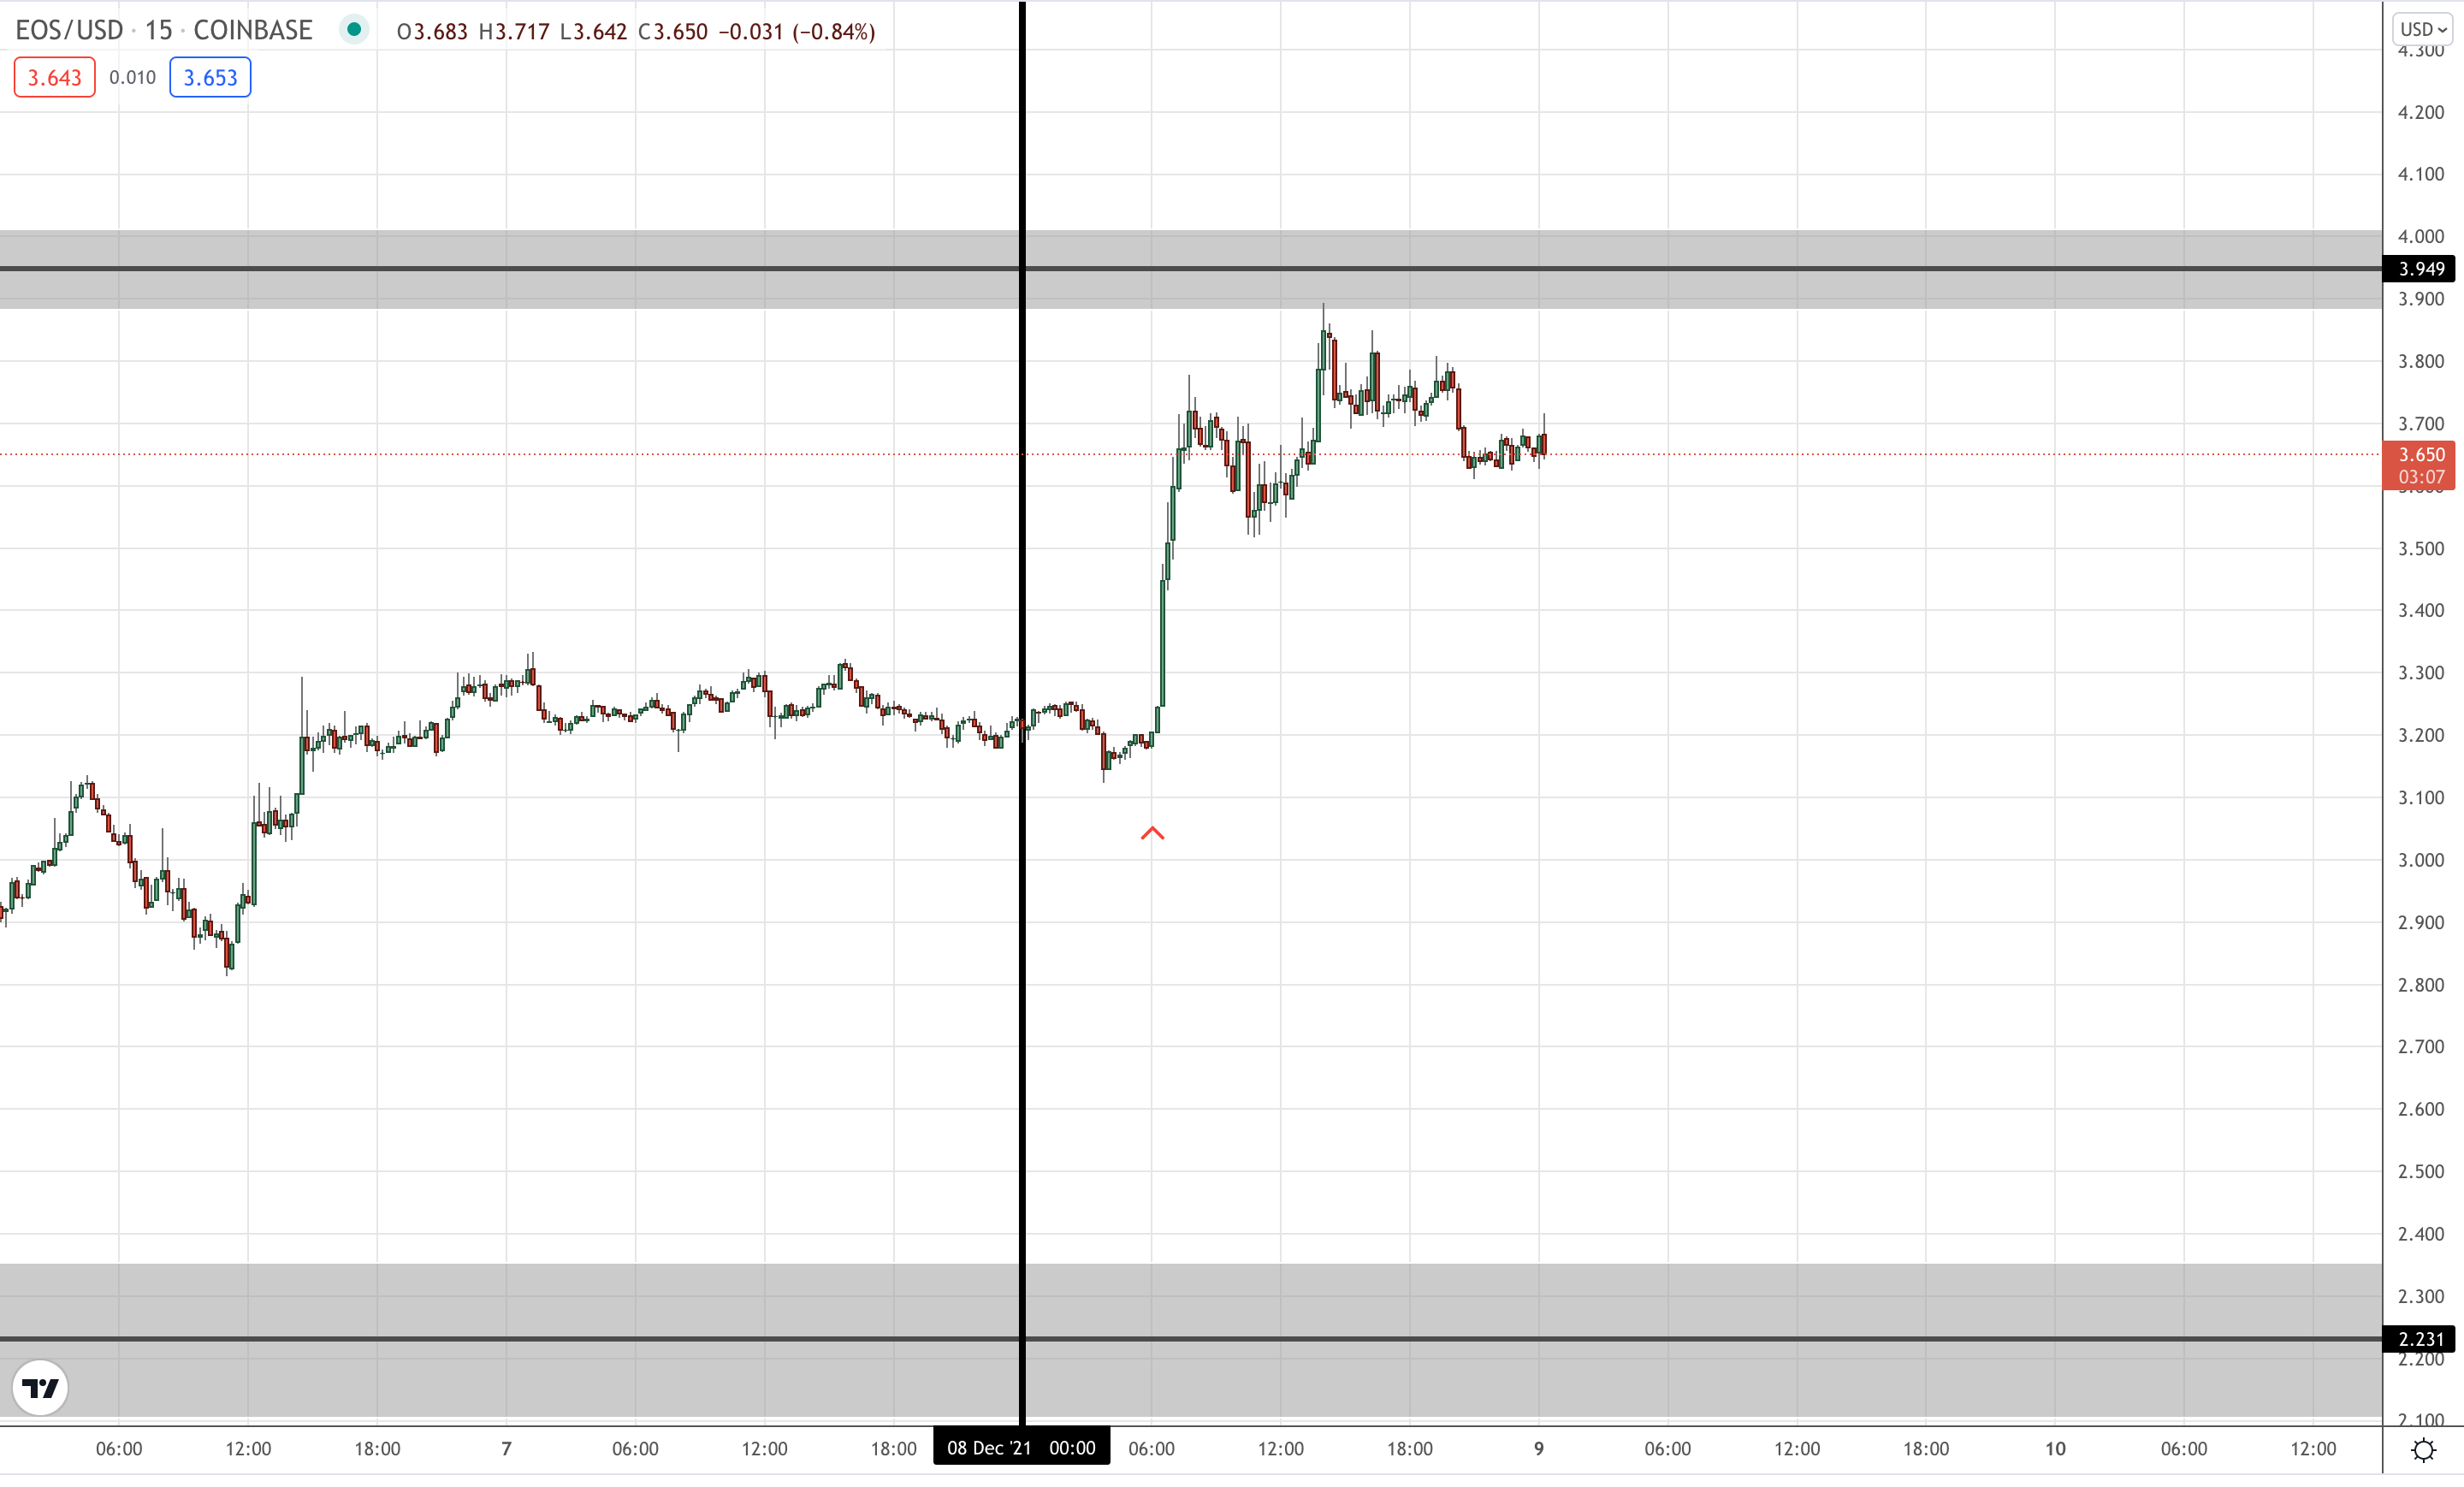 Today’s EOS price on the 15 minute chart.